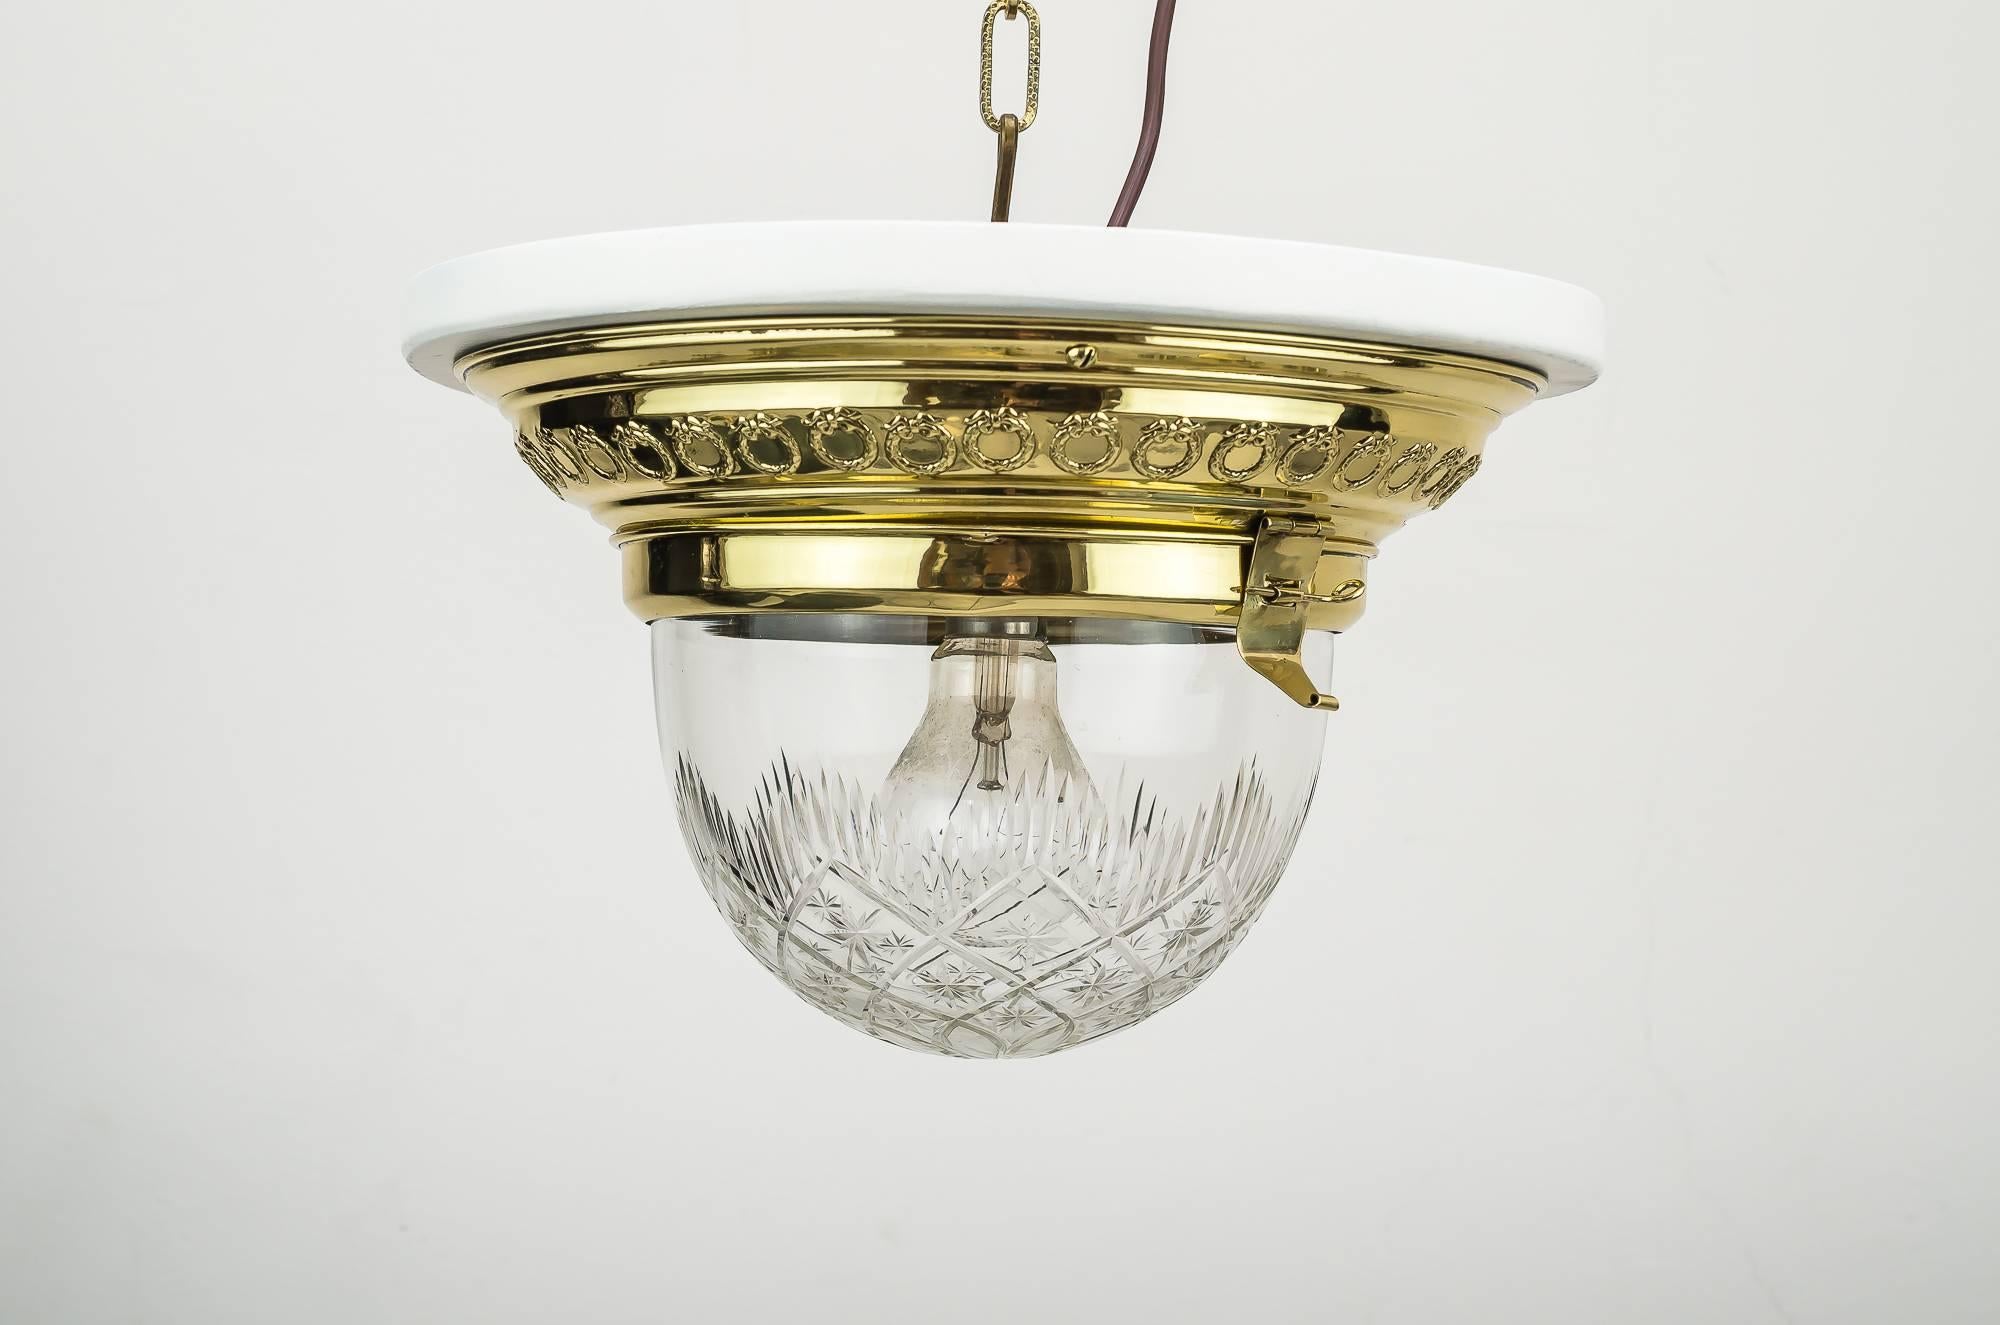 Two jugendstil ceiling lamps 1906 with original glass and painted wood plate
Polished and stove enamelled.